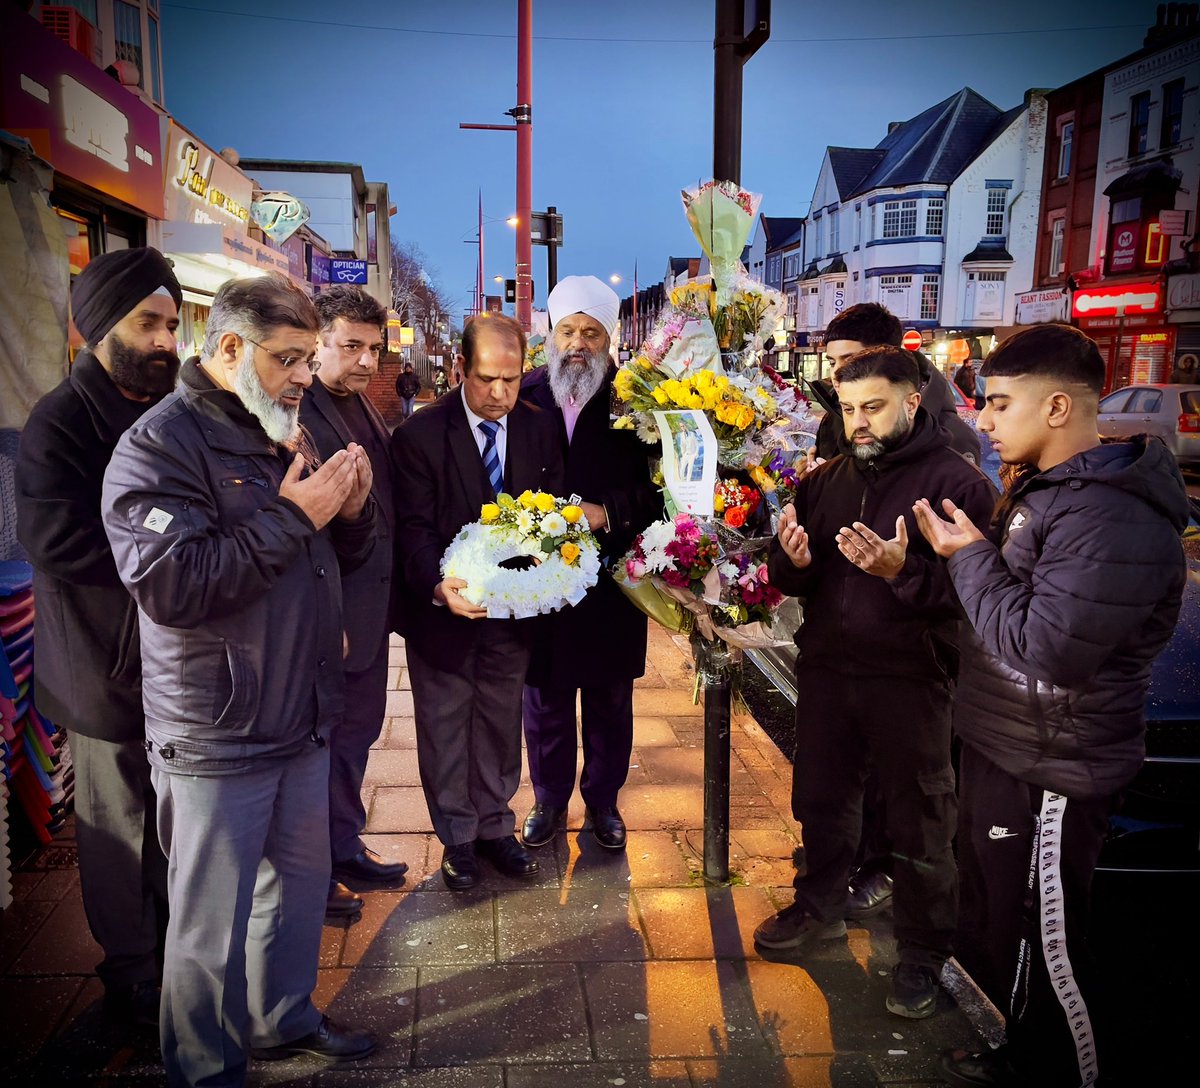 The Soho Road BID extends our deepest condolences on the tragic passing of Hizar Hanif in a car accident that happened on Sunday 18th of Feb 2024. Our hearts are heavy with sorrow for this profound loss. We offer our thoughts & prayers to Hizar's family & loved ones 🙏🏼